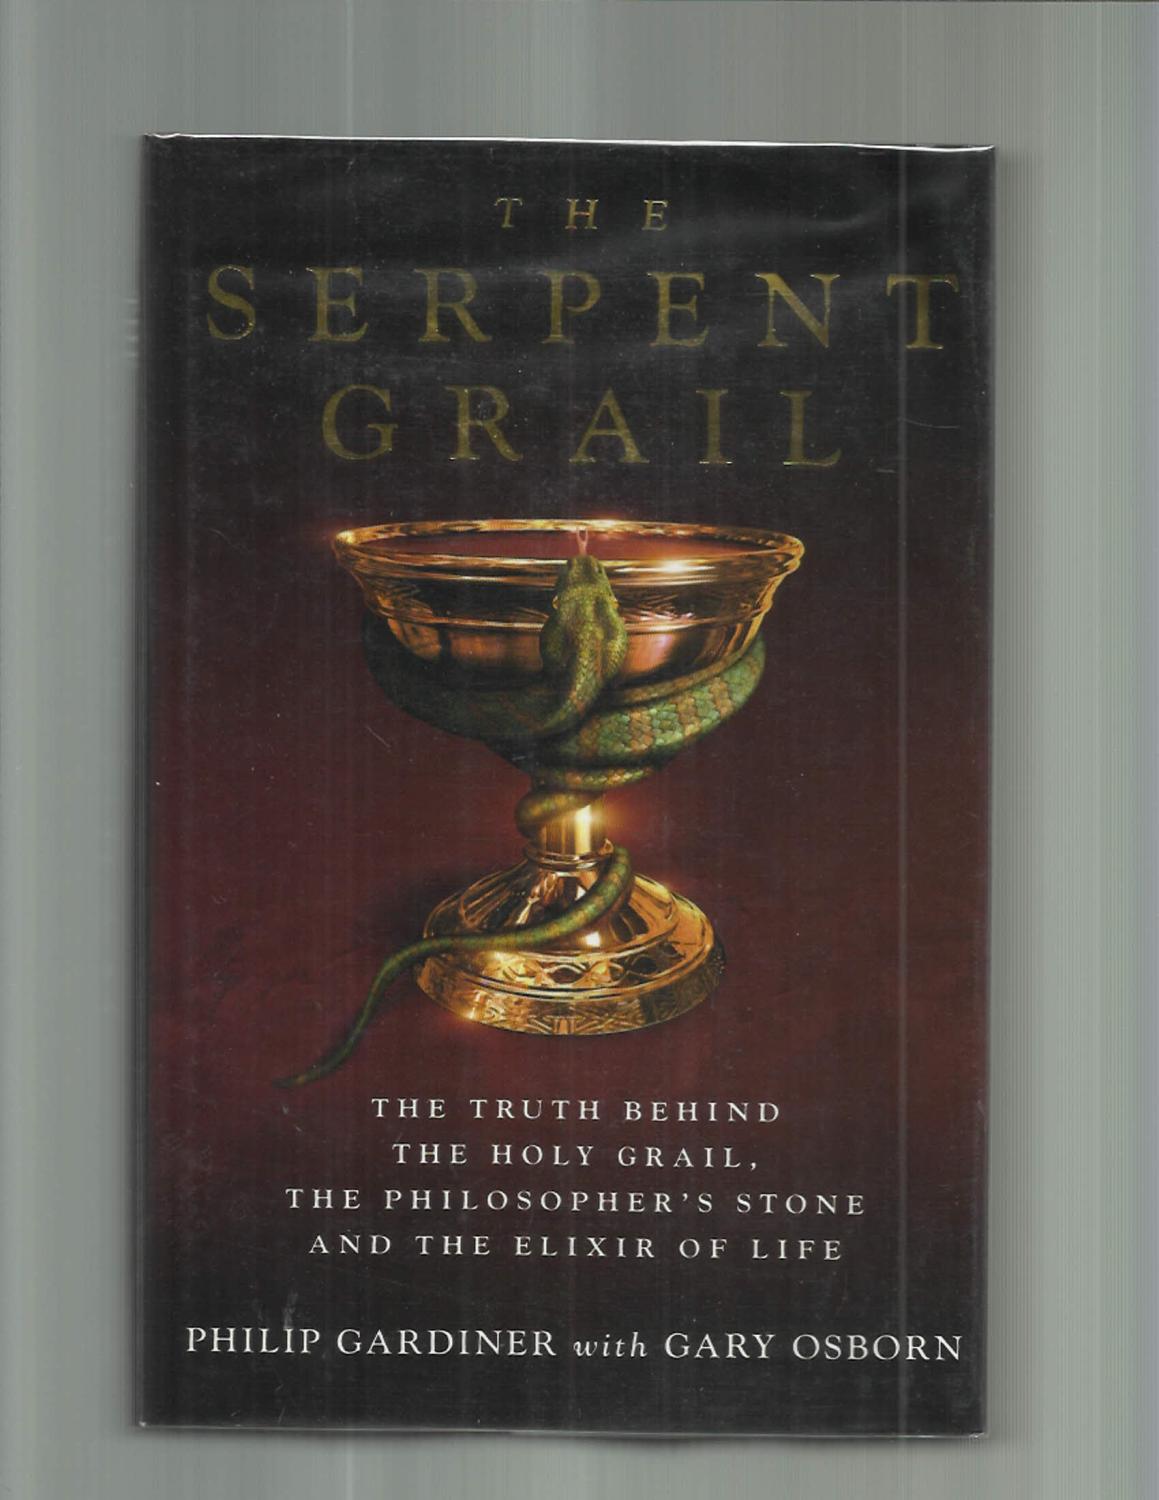 THE SERPENT GRAIL: The Truth Behind The Holy Grail, The Philosopher's Stone and The Elixir of Life. - Philip Gardiner with Gary Osborn